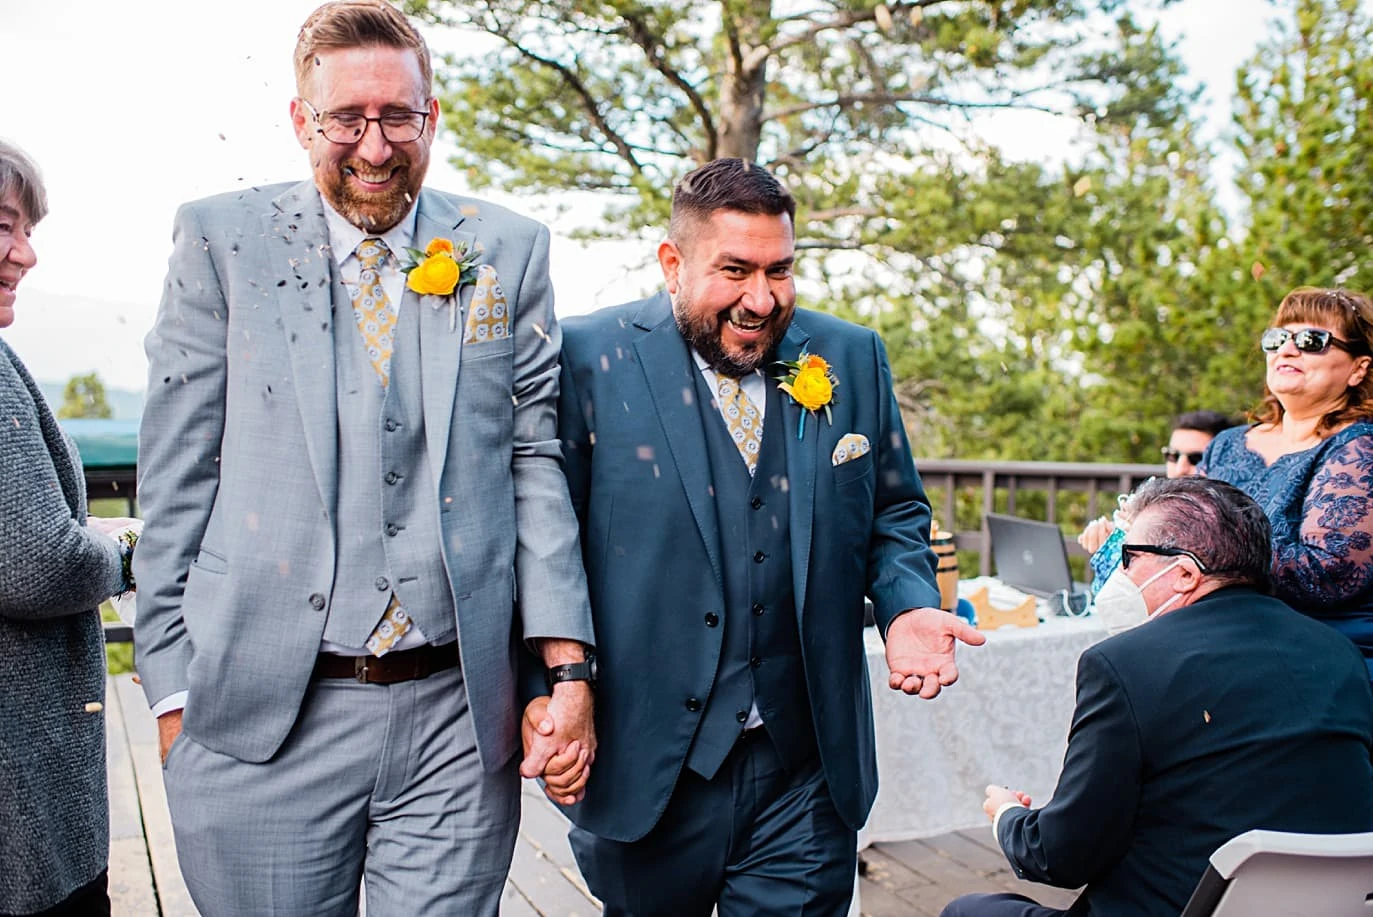 grooms walk down aisle to shower of birdseed at Panorama point during LGBTQ wedding by Colorado LGBT photographer Jennie Crate